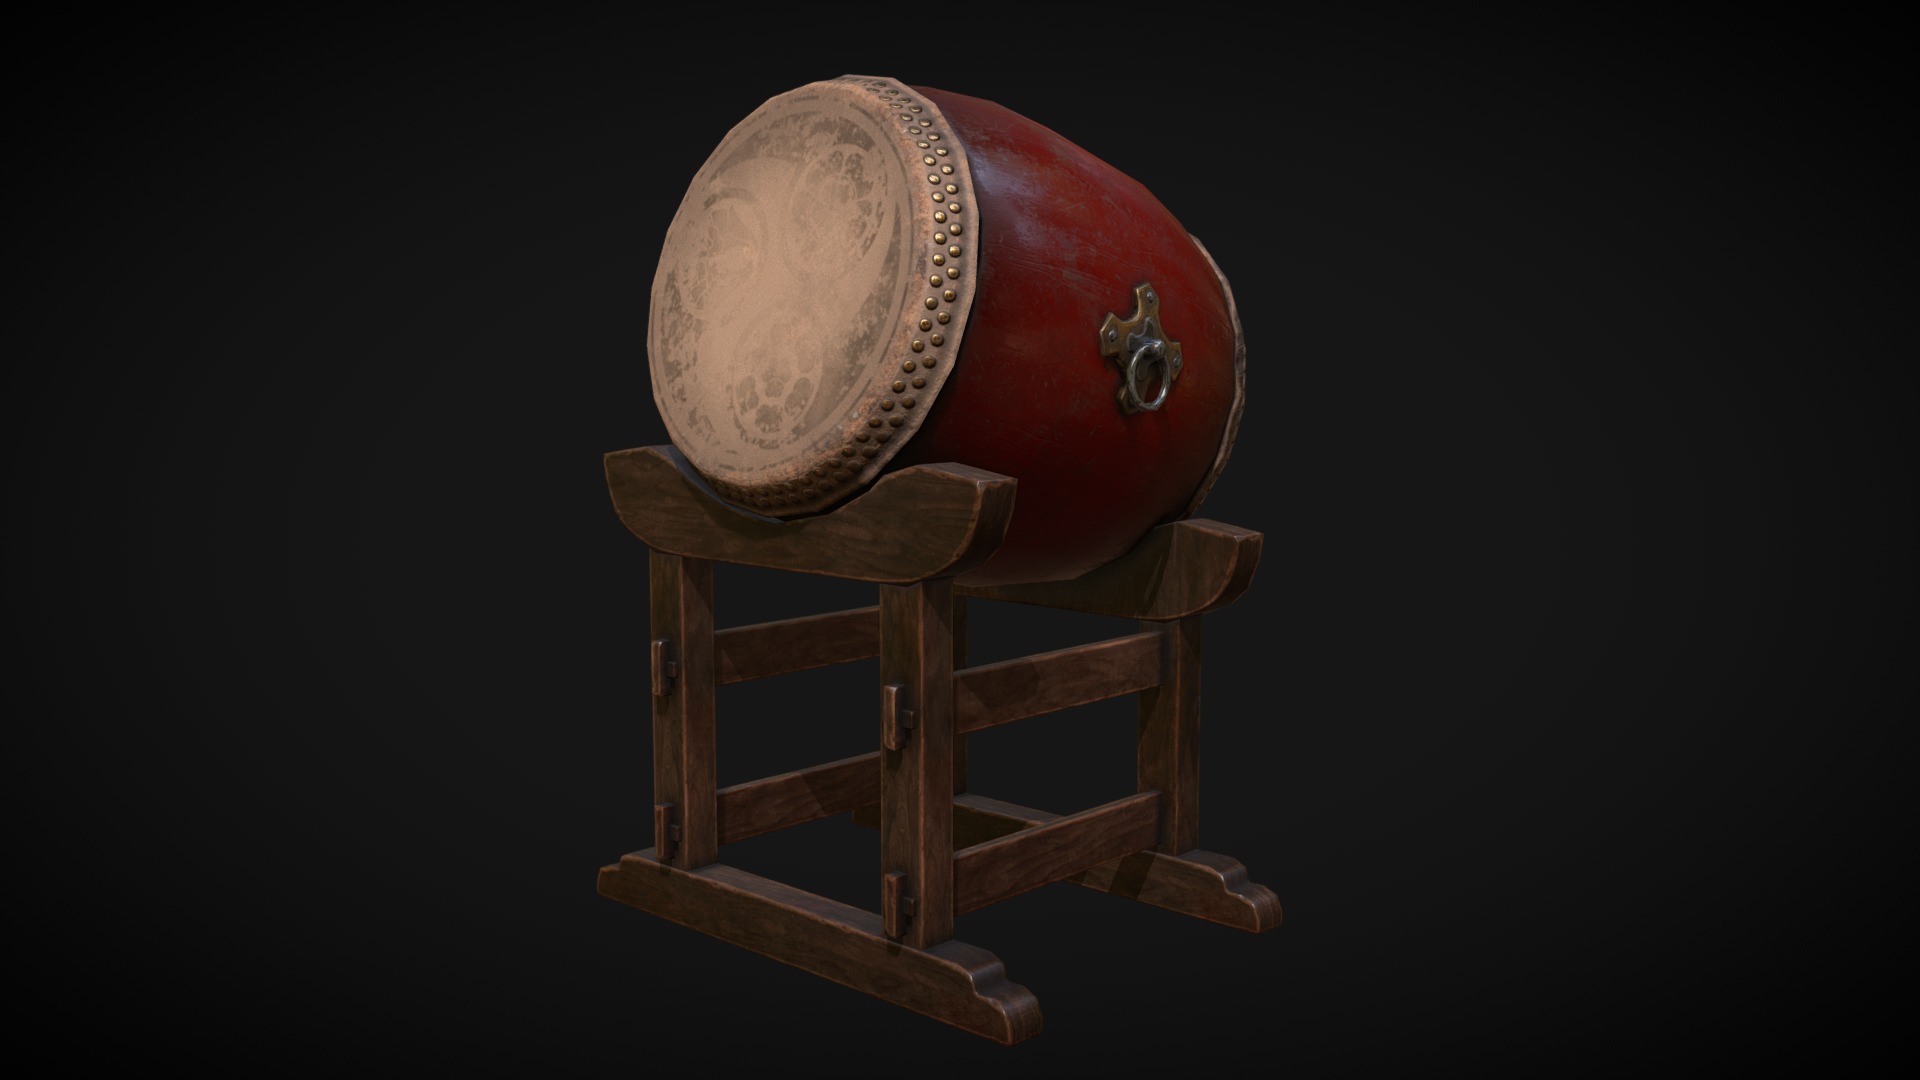 3D model Japanese Drum Taiko - This is a 3D model of the Japanese Drum Taiko. The 3D model is about a wooden chair with a round object on it.